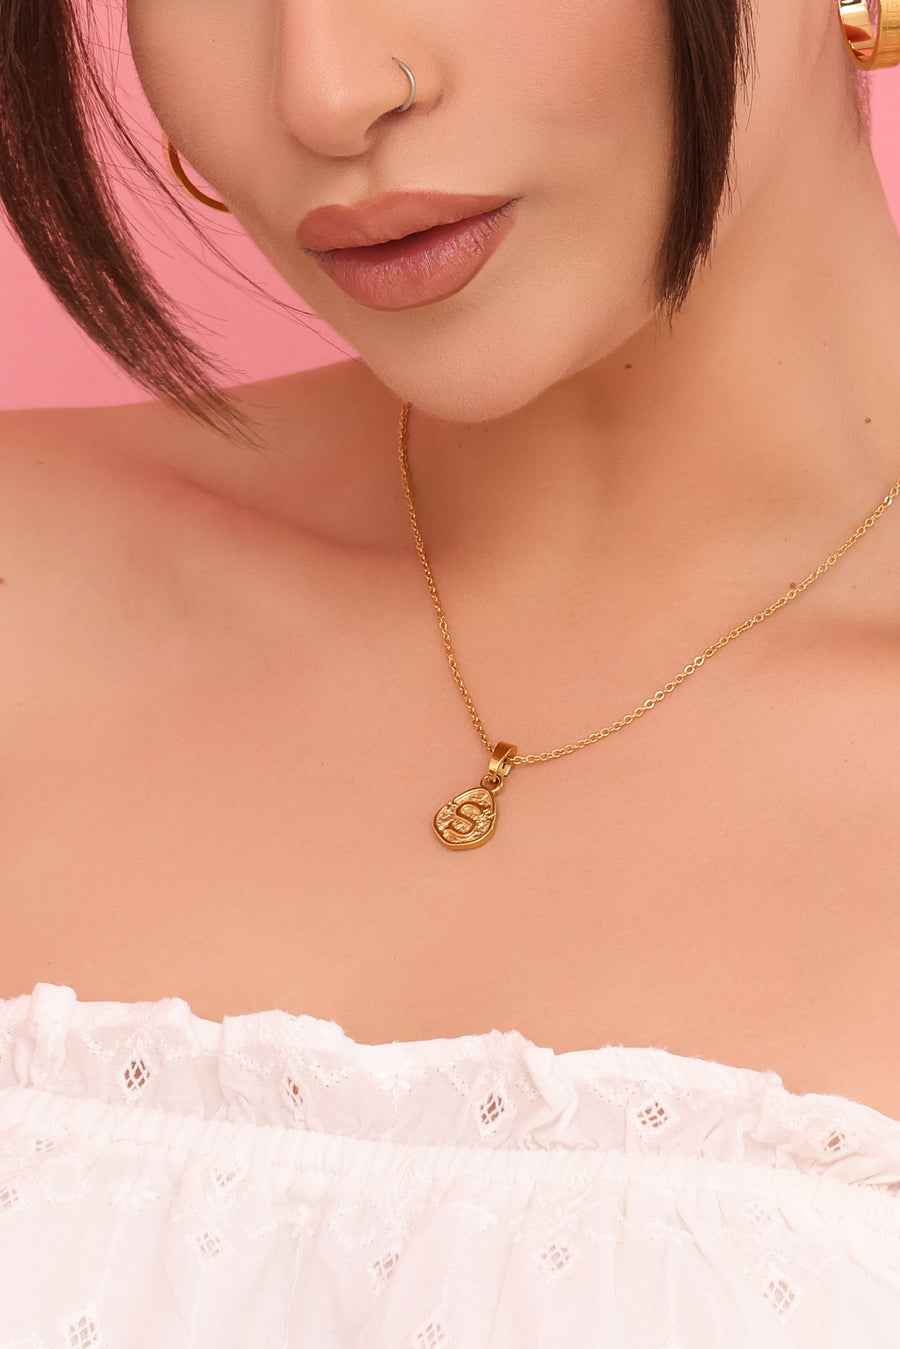 "I" Tberfil Letter Pendant with Petite Adjustable Chain Necklace